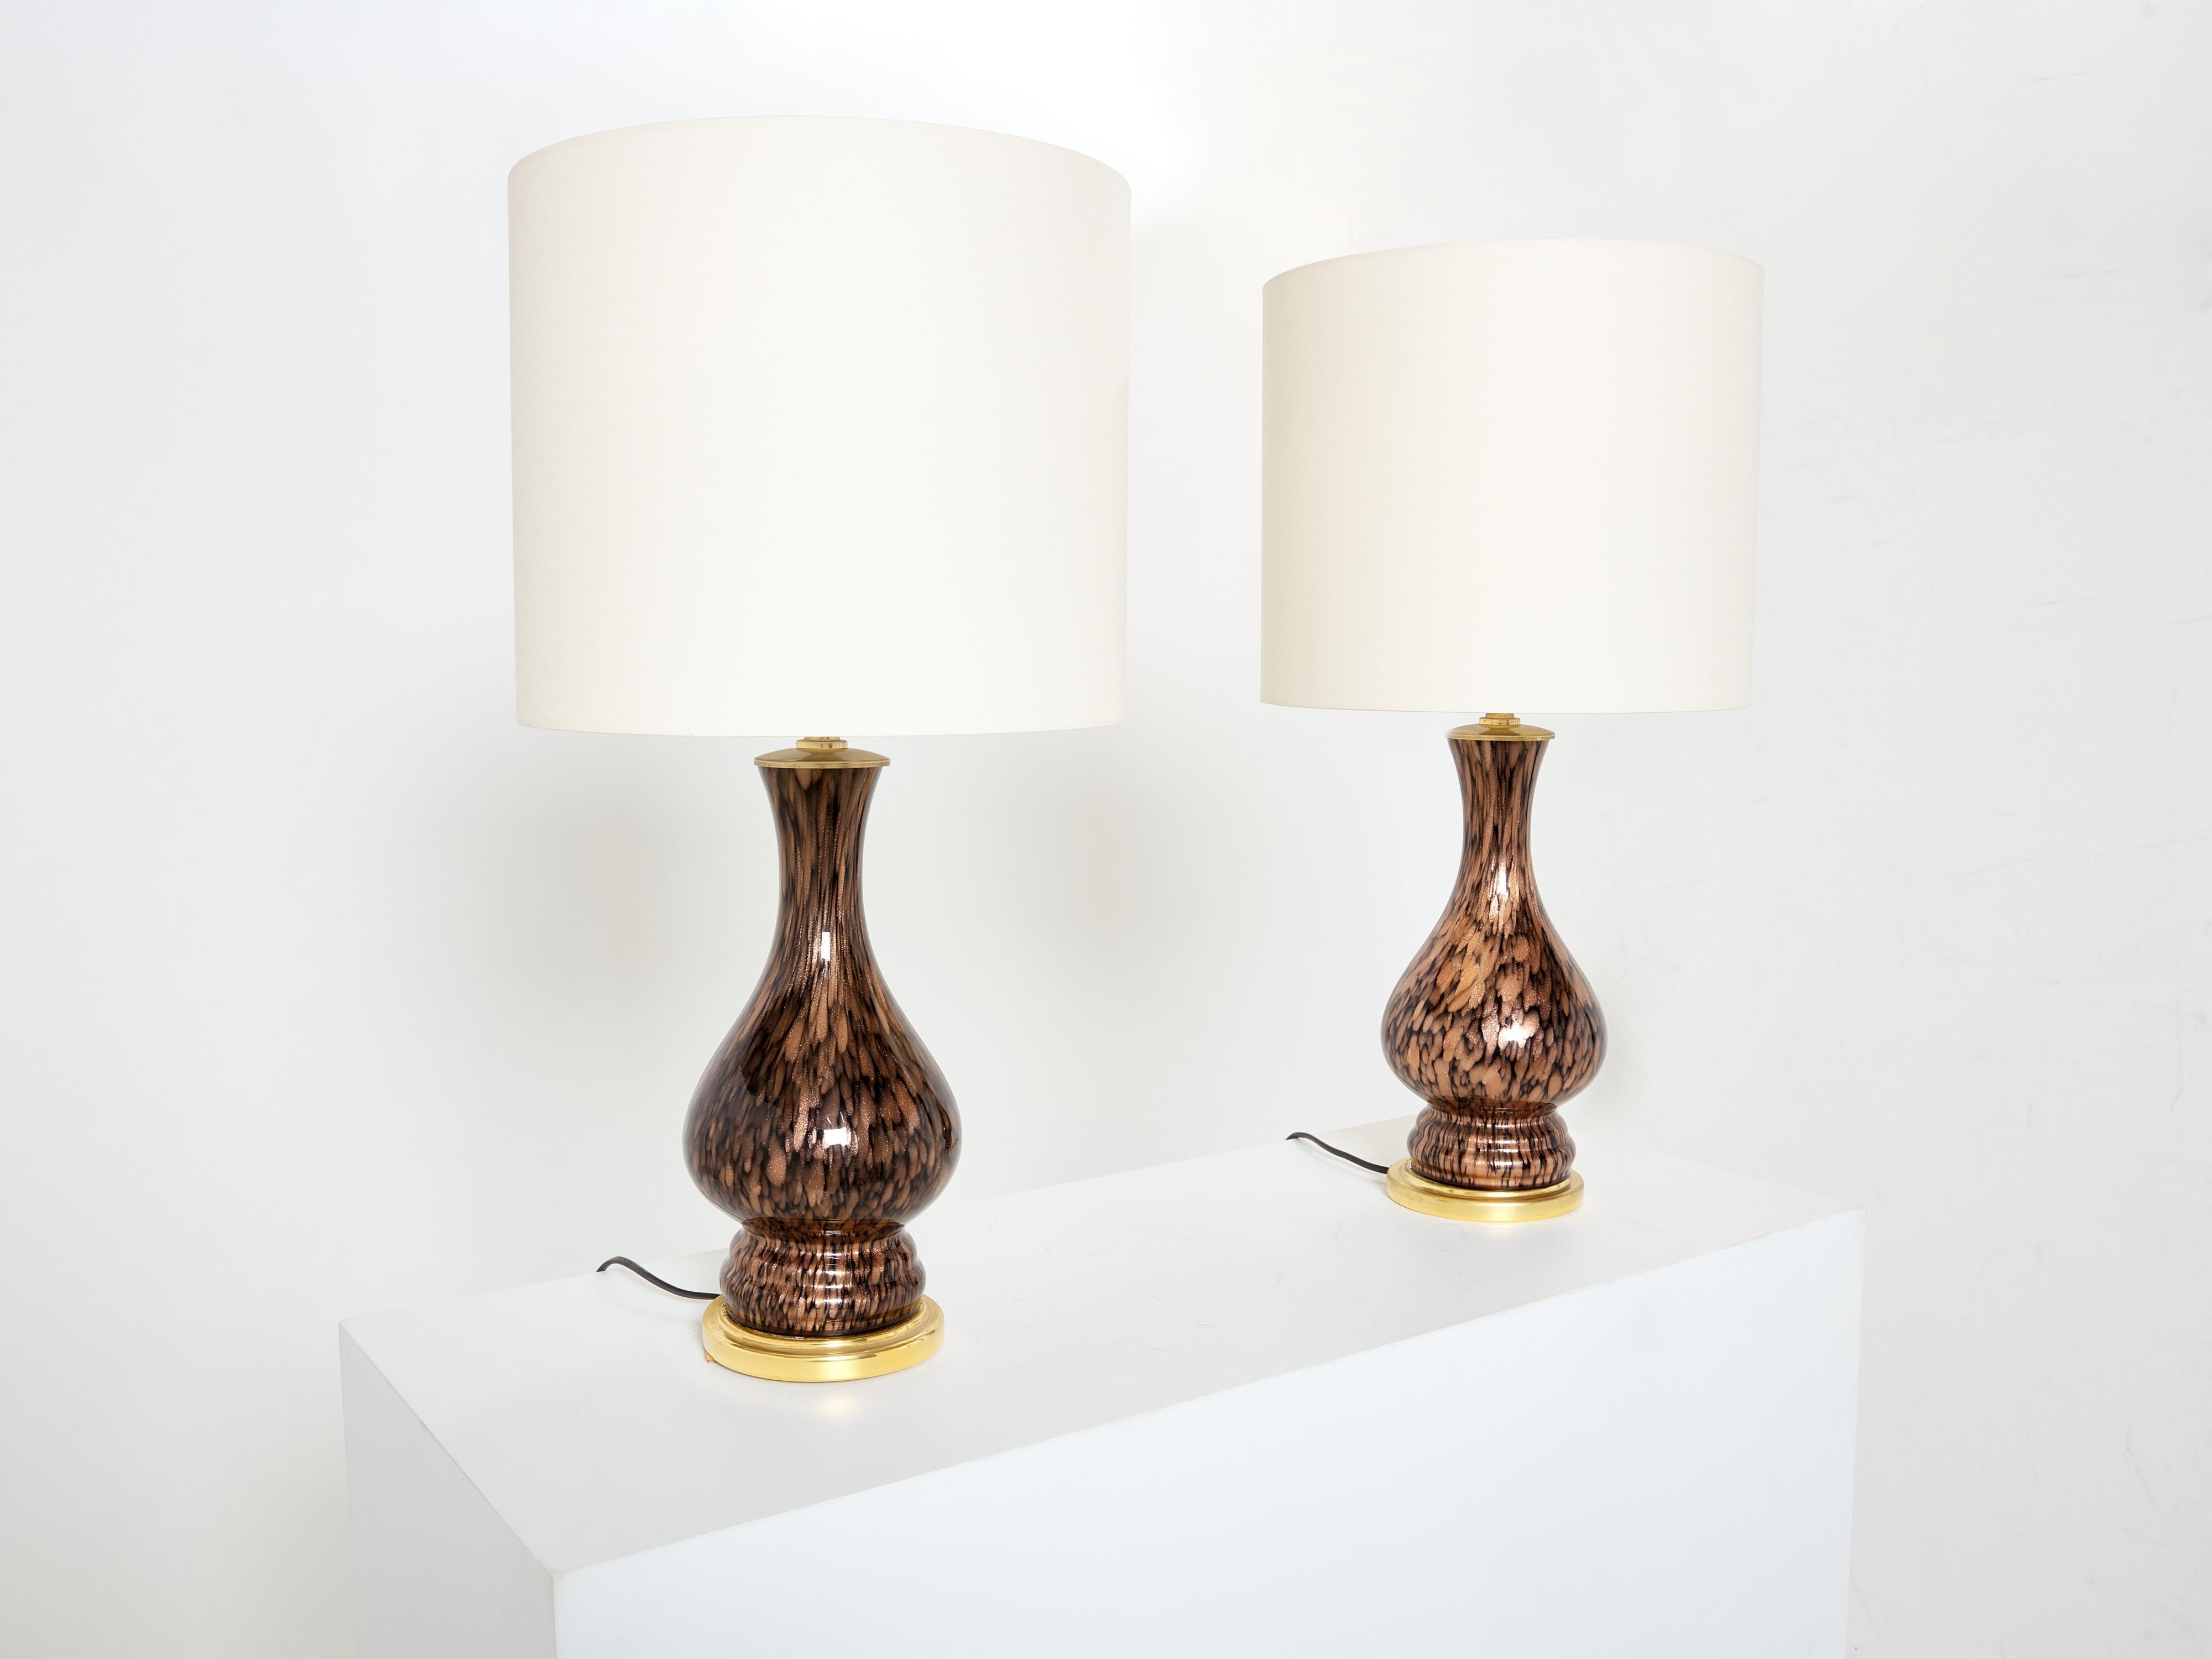 This beautiful pair of 1960s Vincenzo Mason 'Avventurina' bedside table lamps boast the exquisite craftsmanship characteristic of vintage Murano glass. Featuring elegantly rounded curves with distinguished rose and gold accents, their fluted design